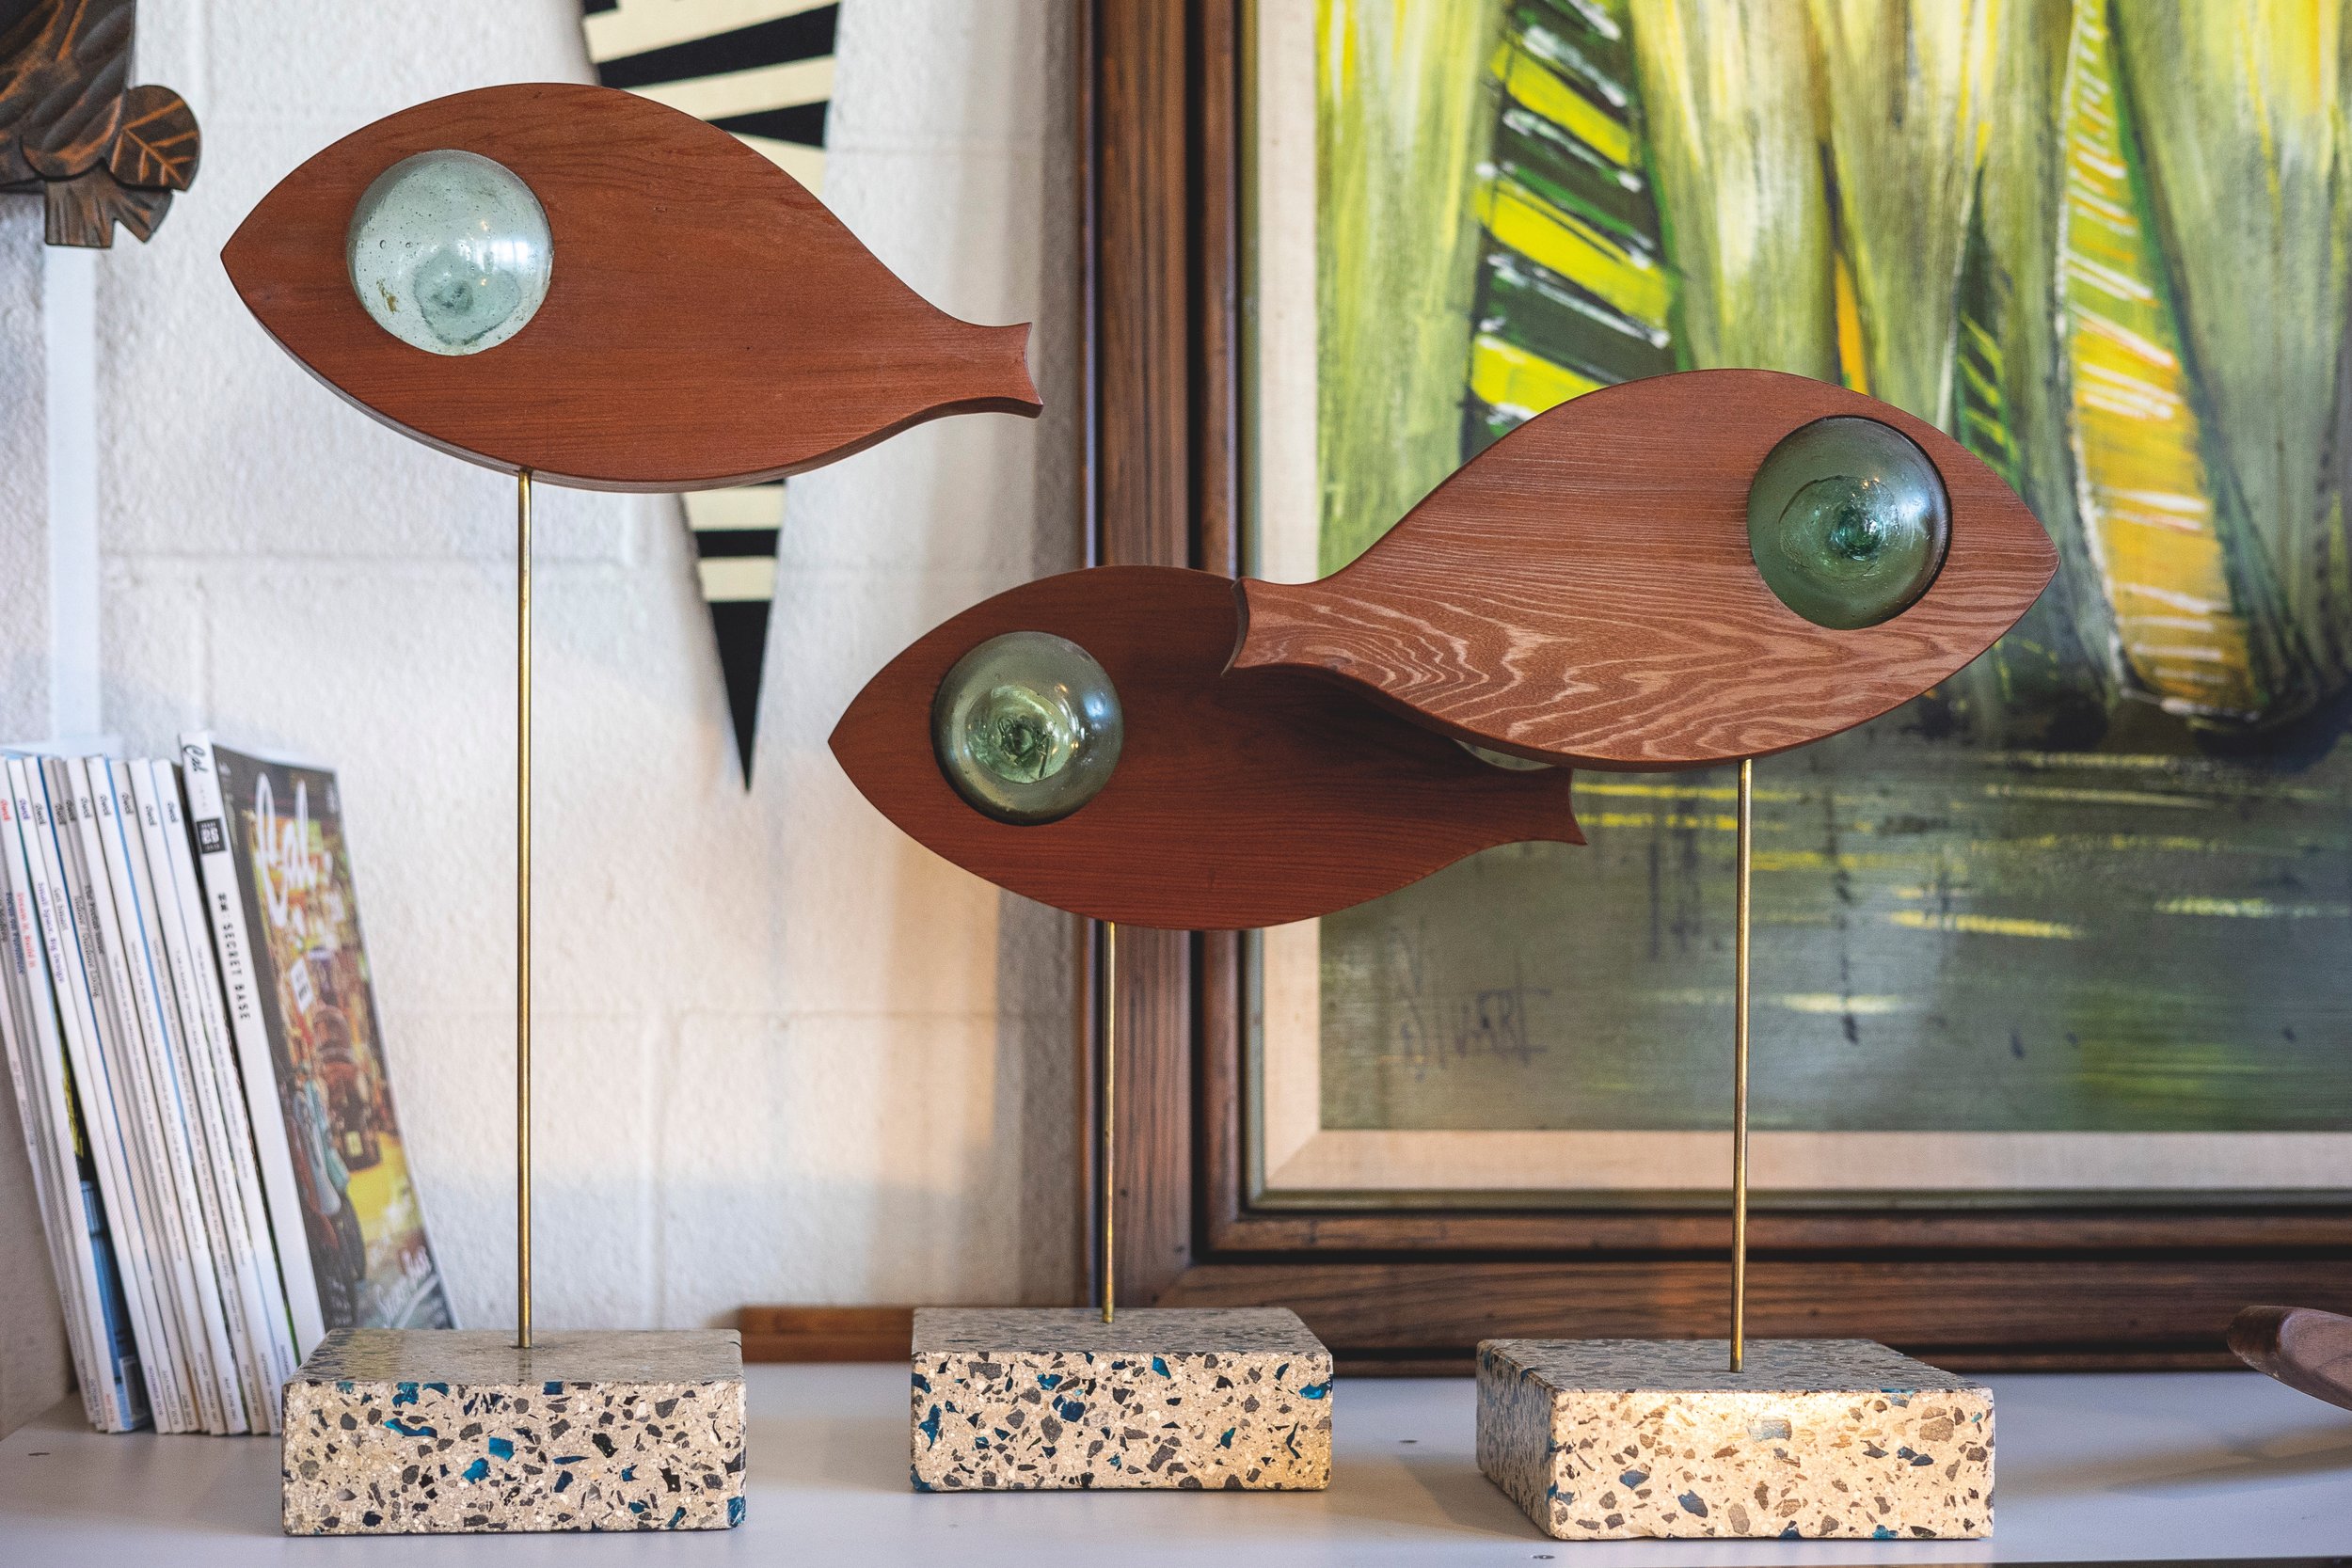  John Reyno carved these fish himself using salvaged redwood, found beach glass and concrete. After retiring to Hawai‘i, Reyno began restoring his own mid-century furniture. That enterprise led to establishing his own studio, Hawaii Modern.   Photos 